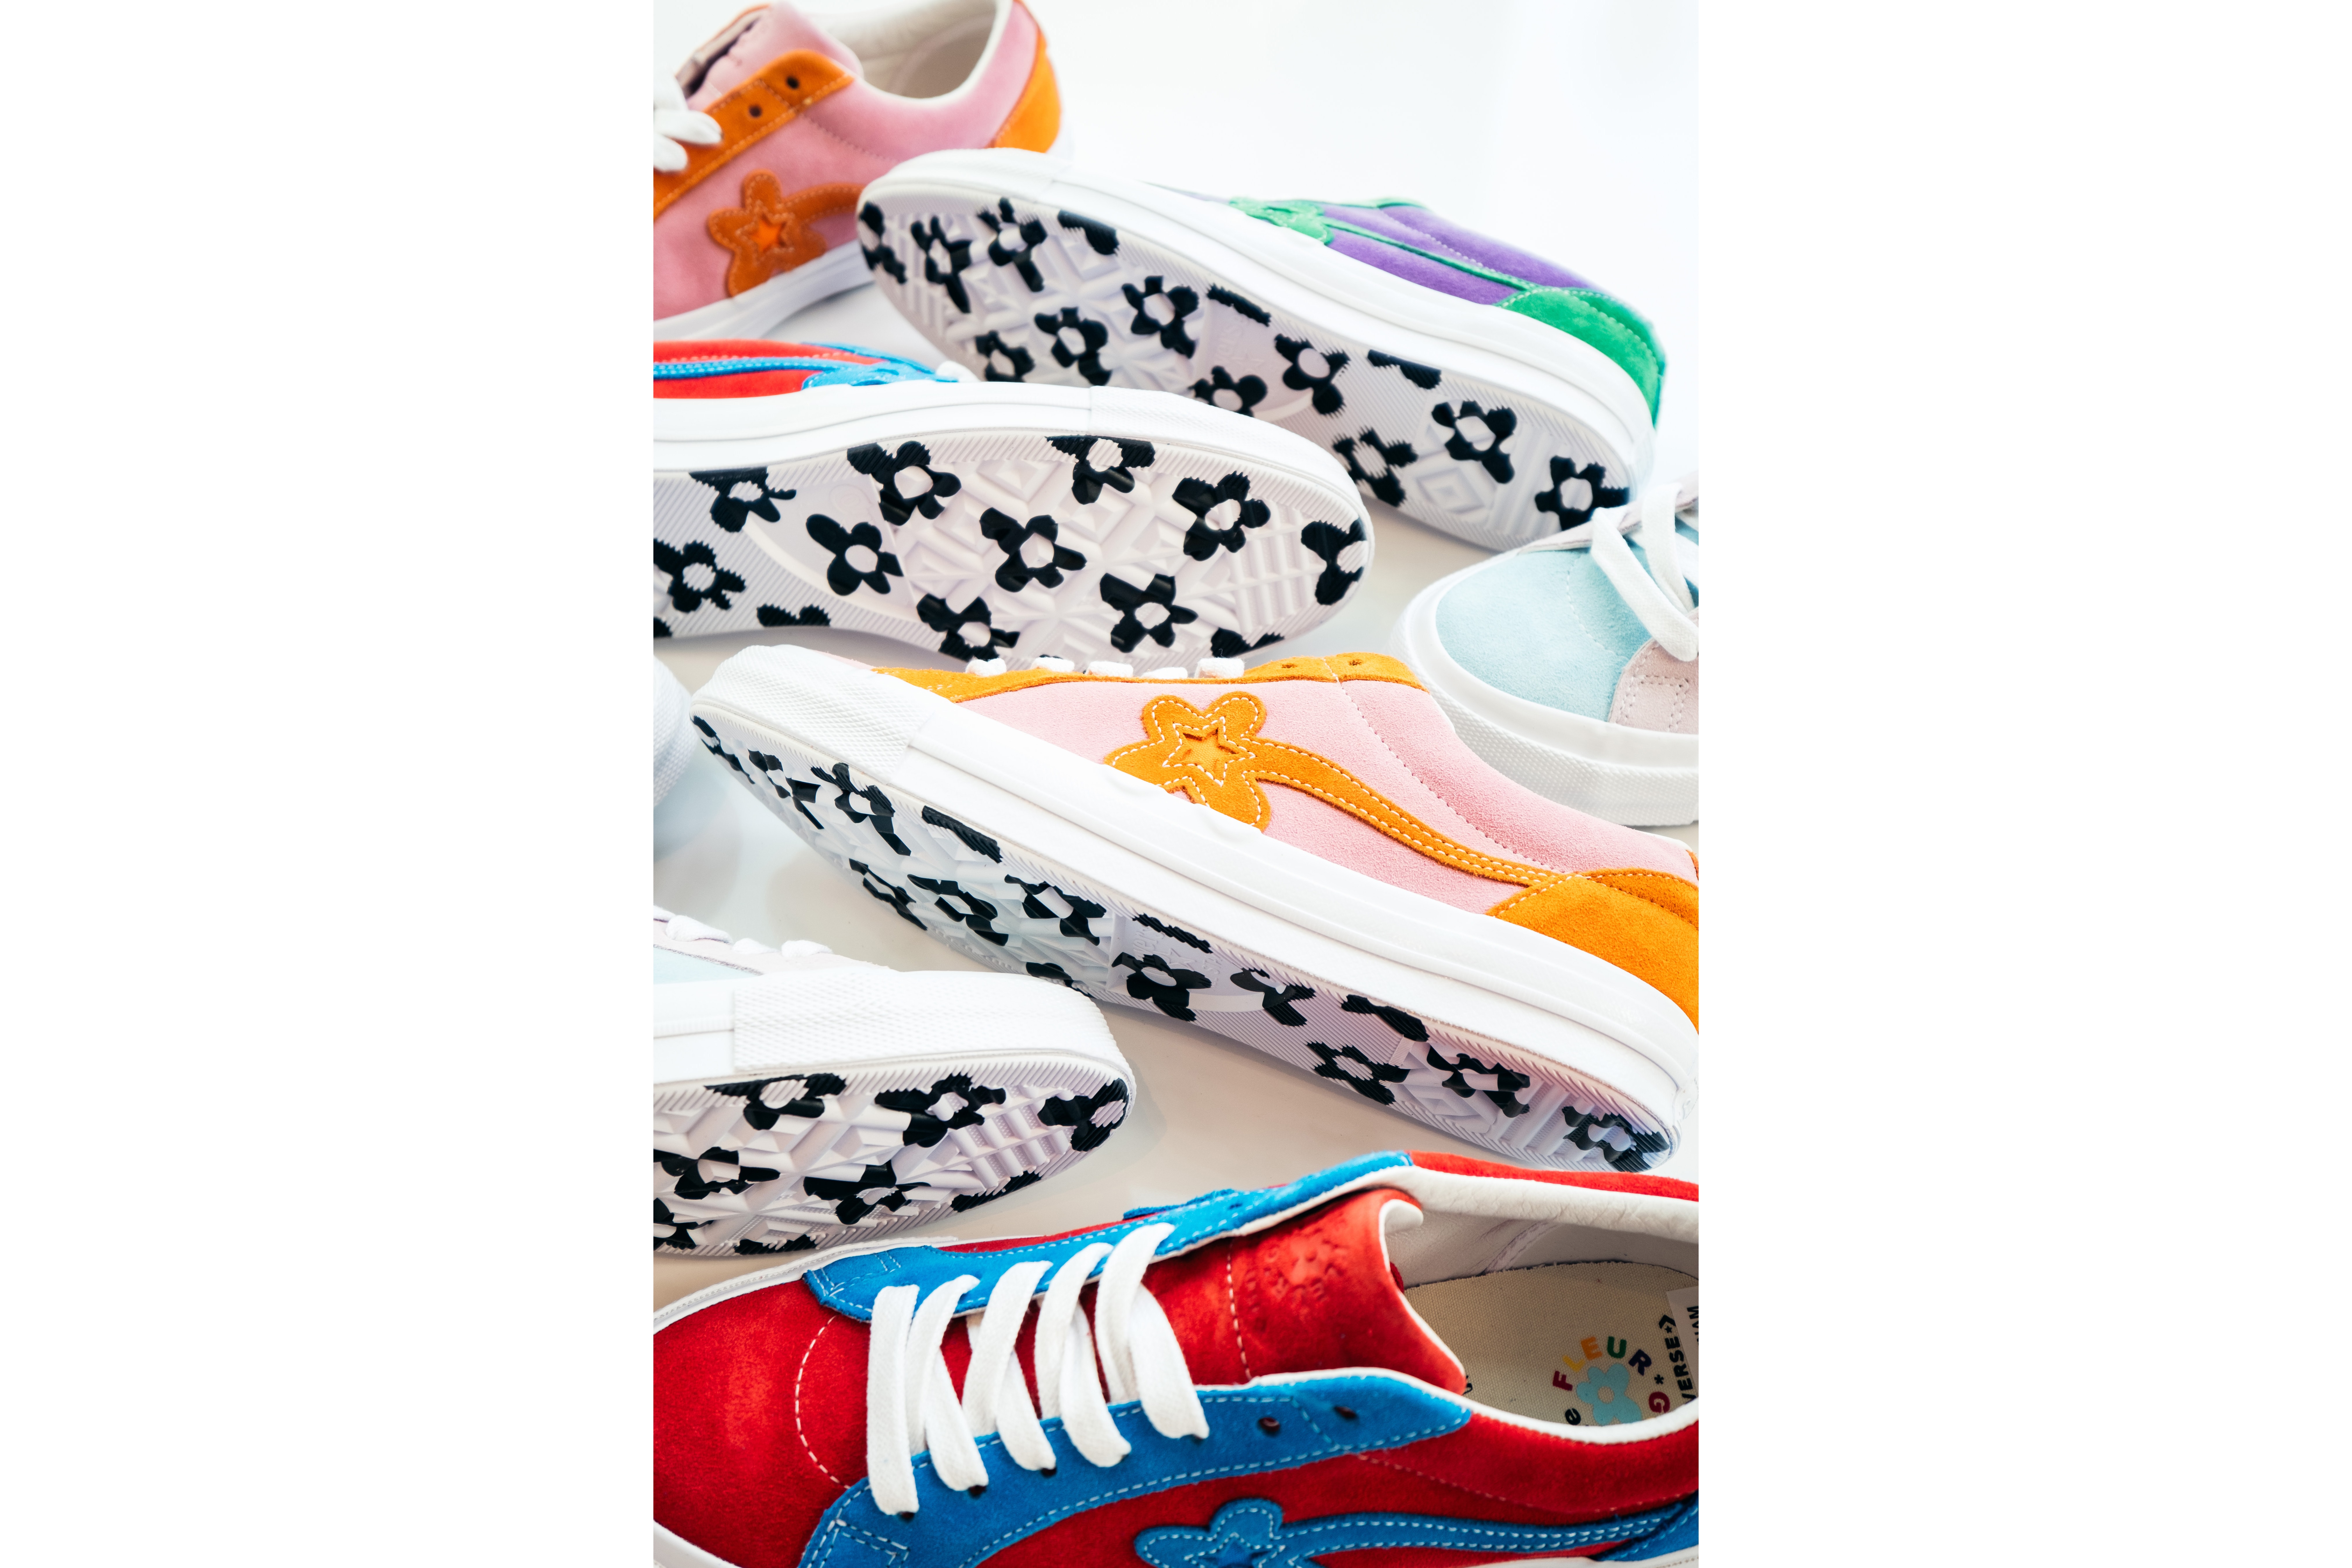 Converse GOLF Le FLEUR One Star Collection Tyler the Creator Sneaker Shoe Collaboration Pastel Color Spring Summer